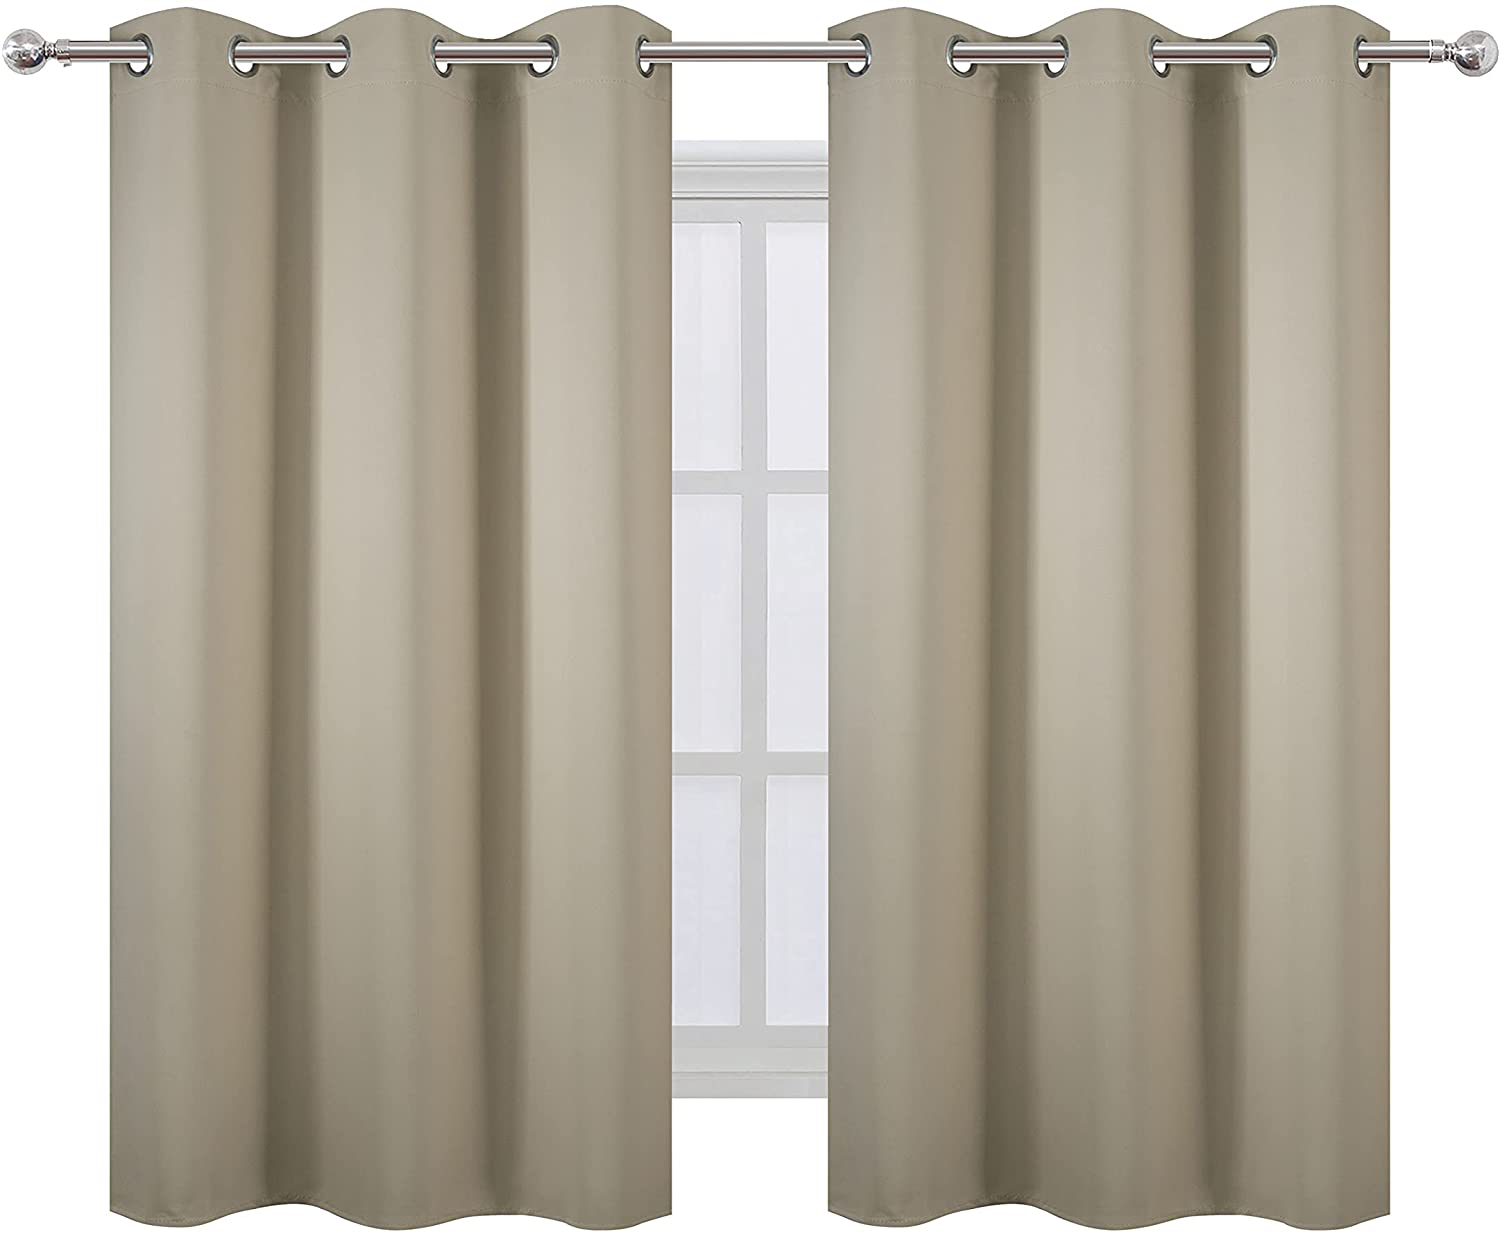 LEMOMO Purple Thermal Blackout Curtains/52 x 54 Inch/Set of 2 Panels Room Darkening Curtains for Bedroom